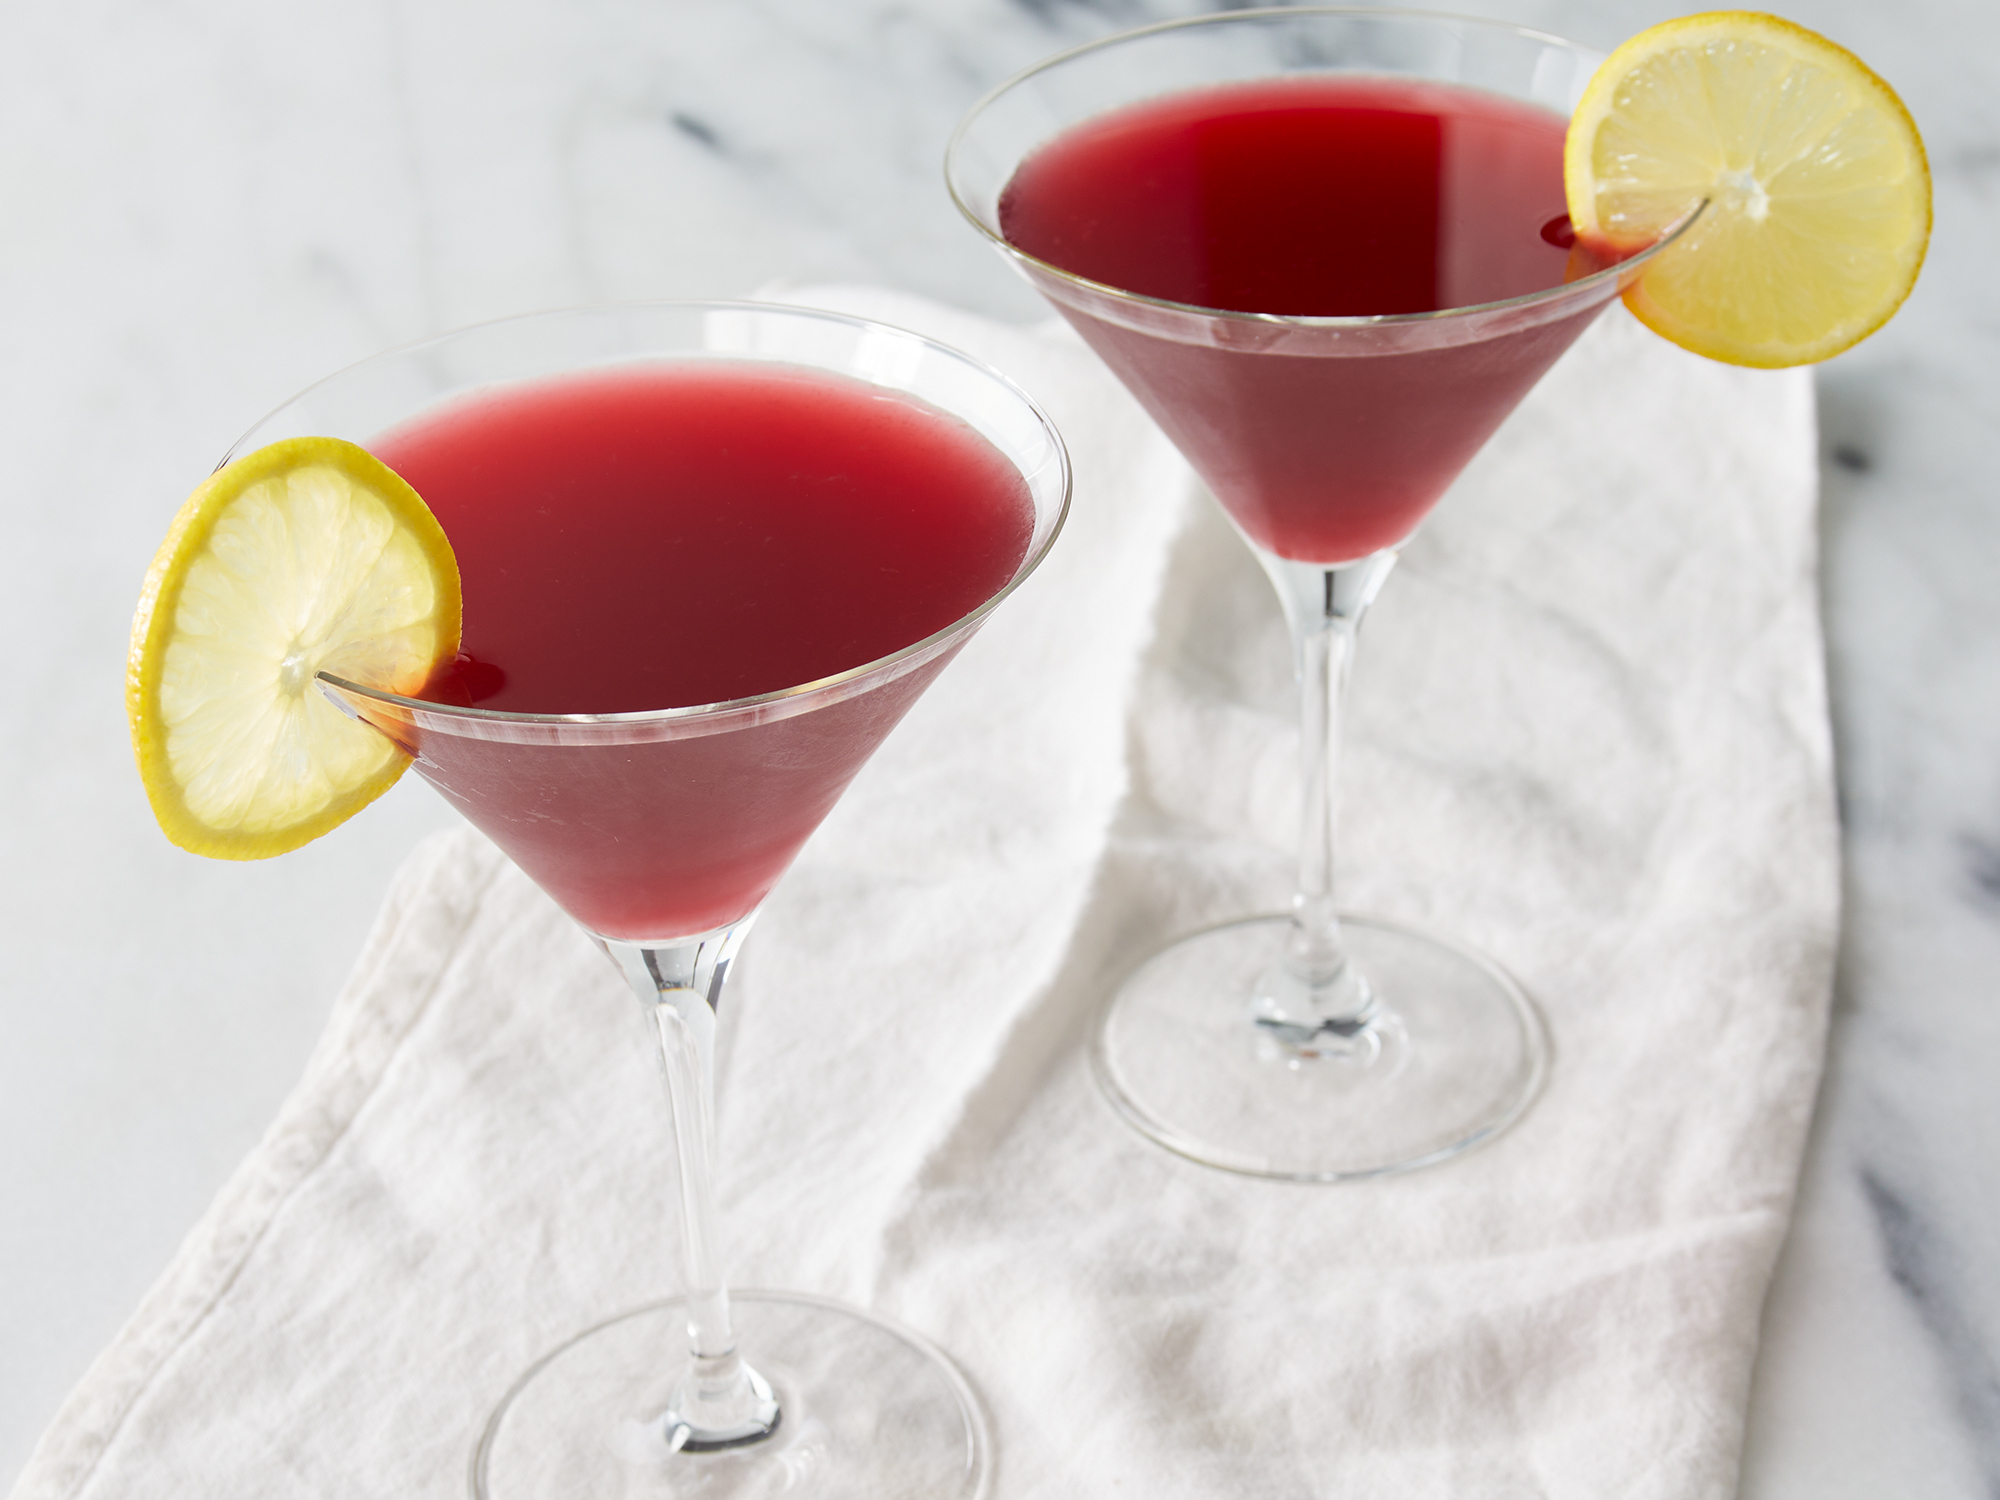 close up on two cosmo-style pomegranate martinis garnished with lemon slices